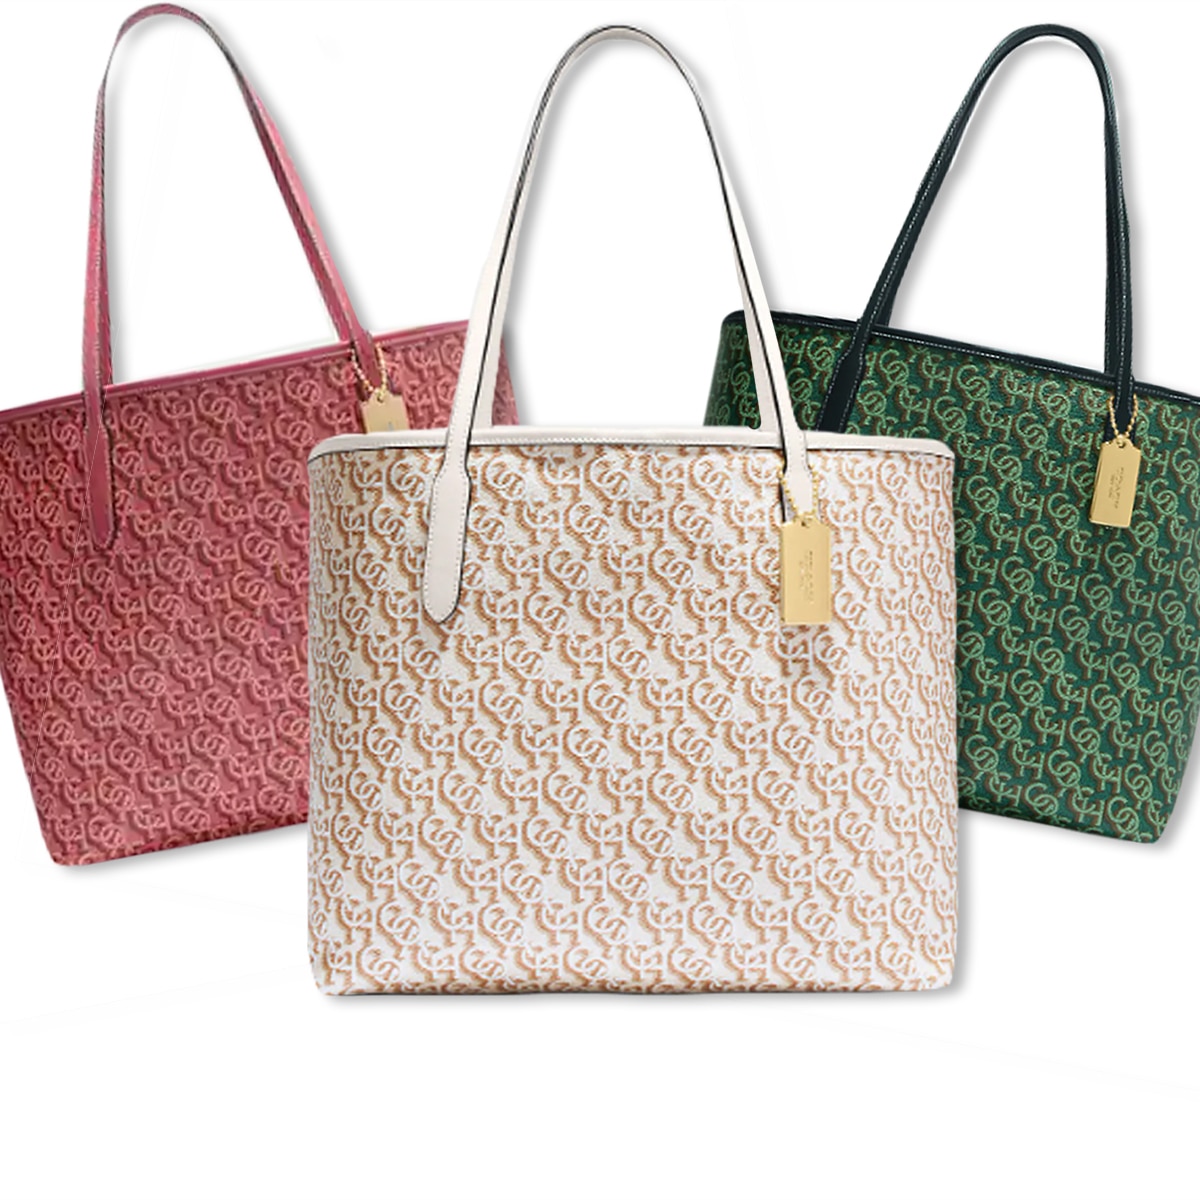 Coach Outlet Tote Bags